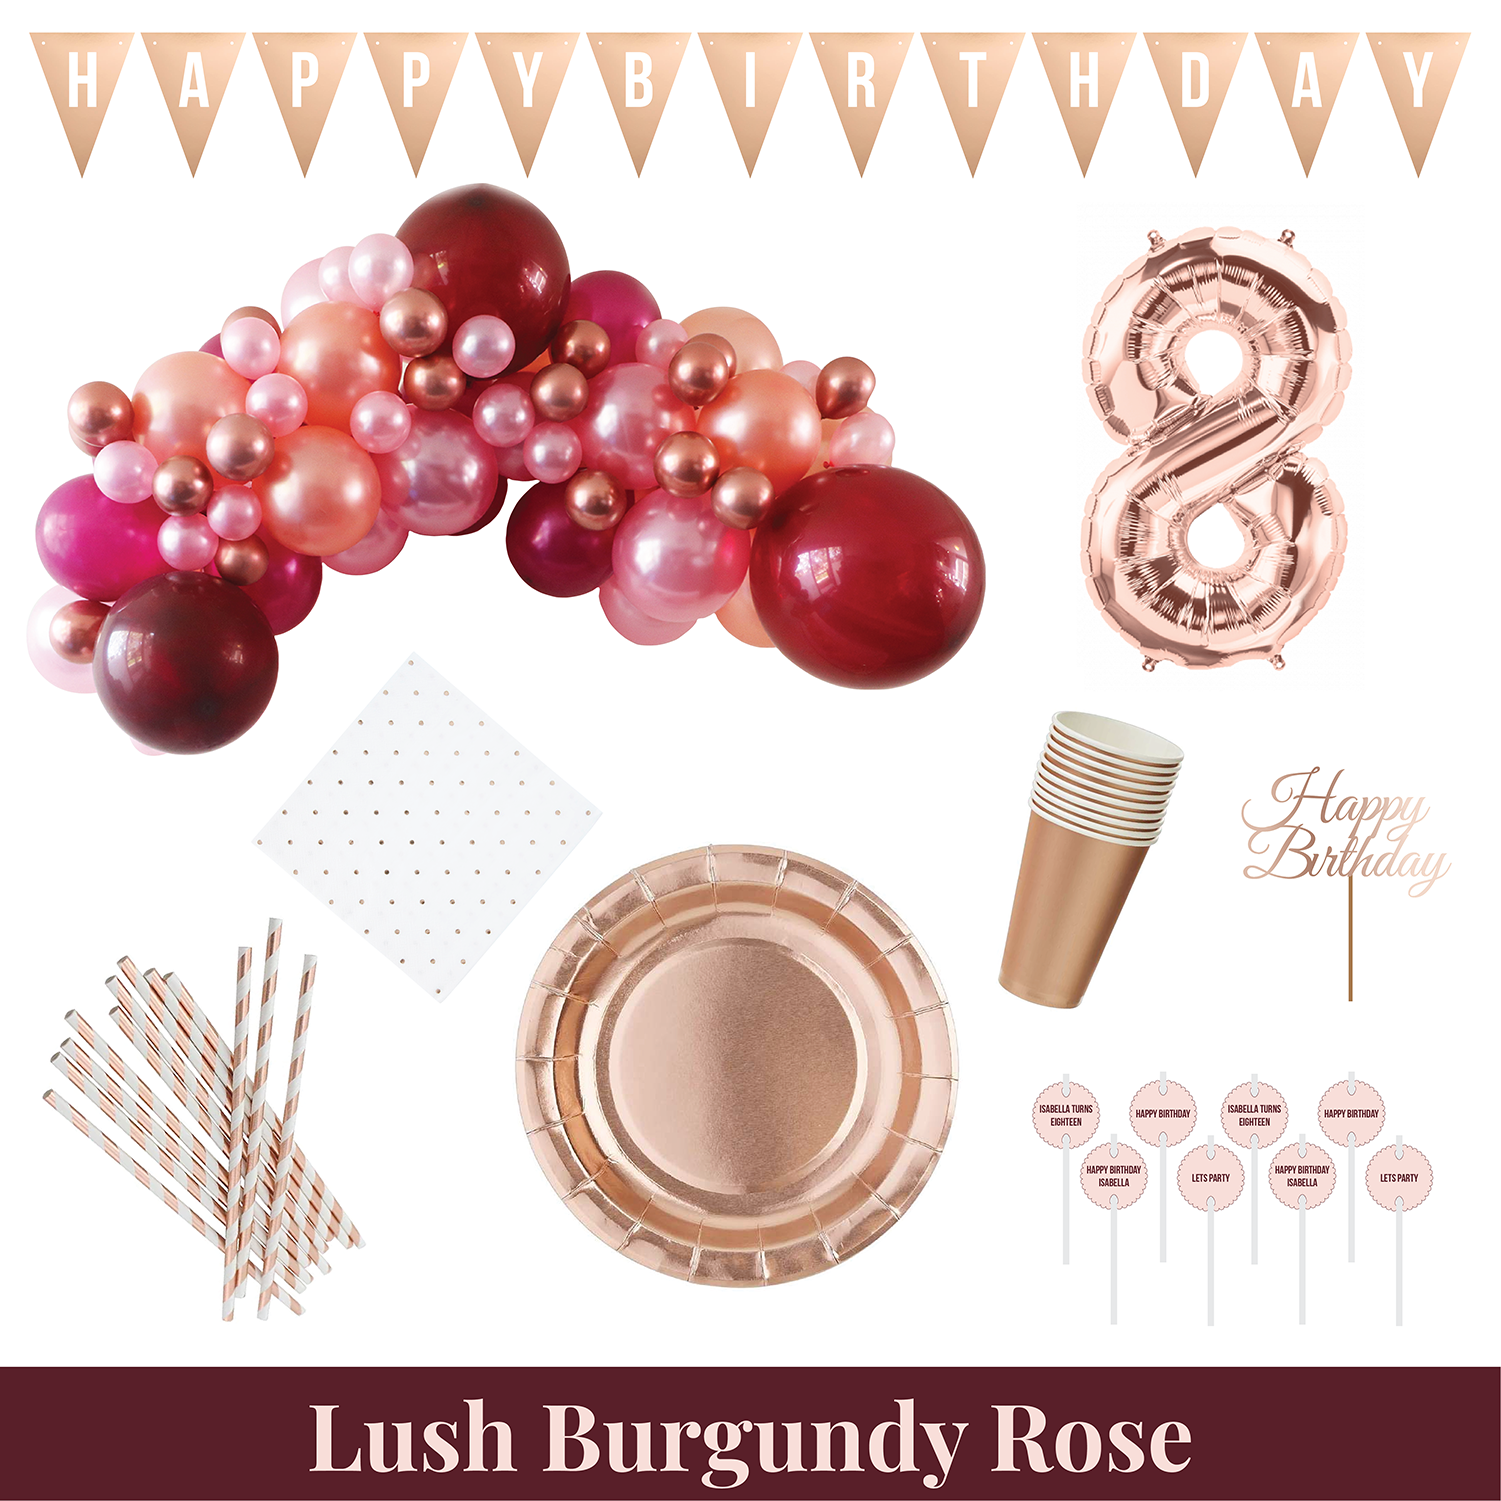 Lush Burgundy Rose party kit contents